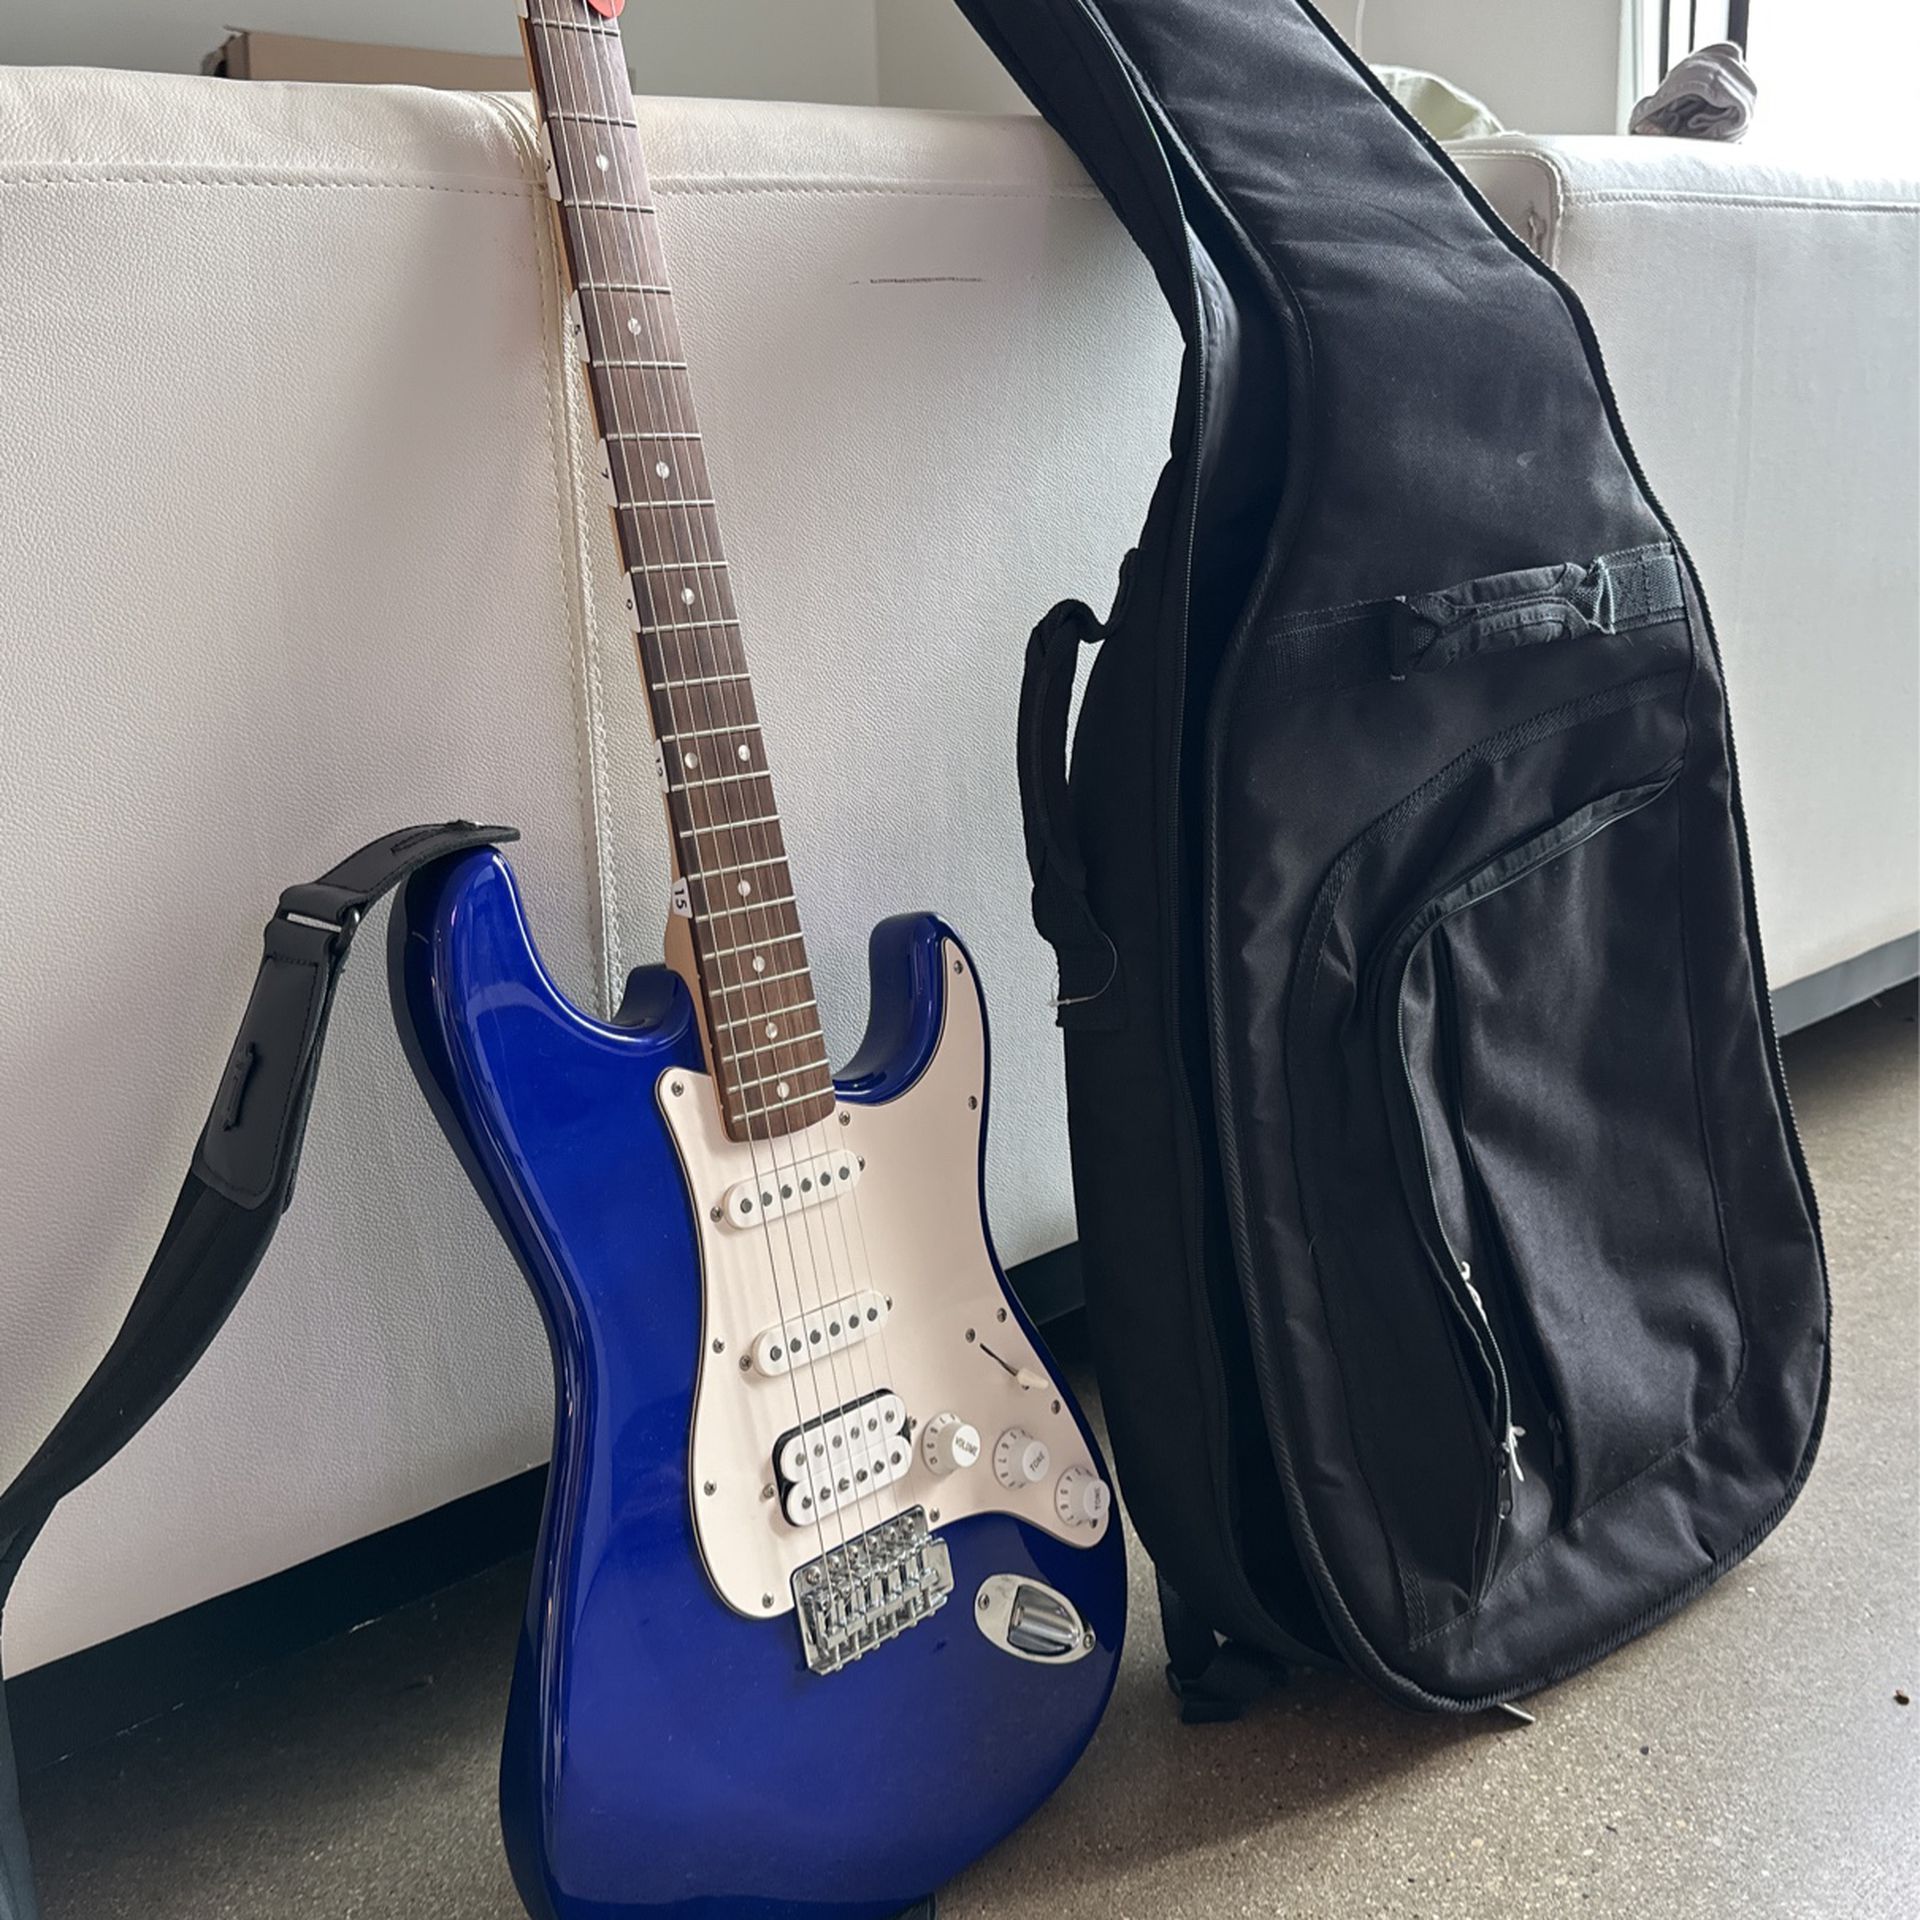 Fender Squier Stratocaster Electric Guitar Blue With Tuner and Bag